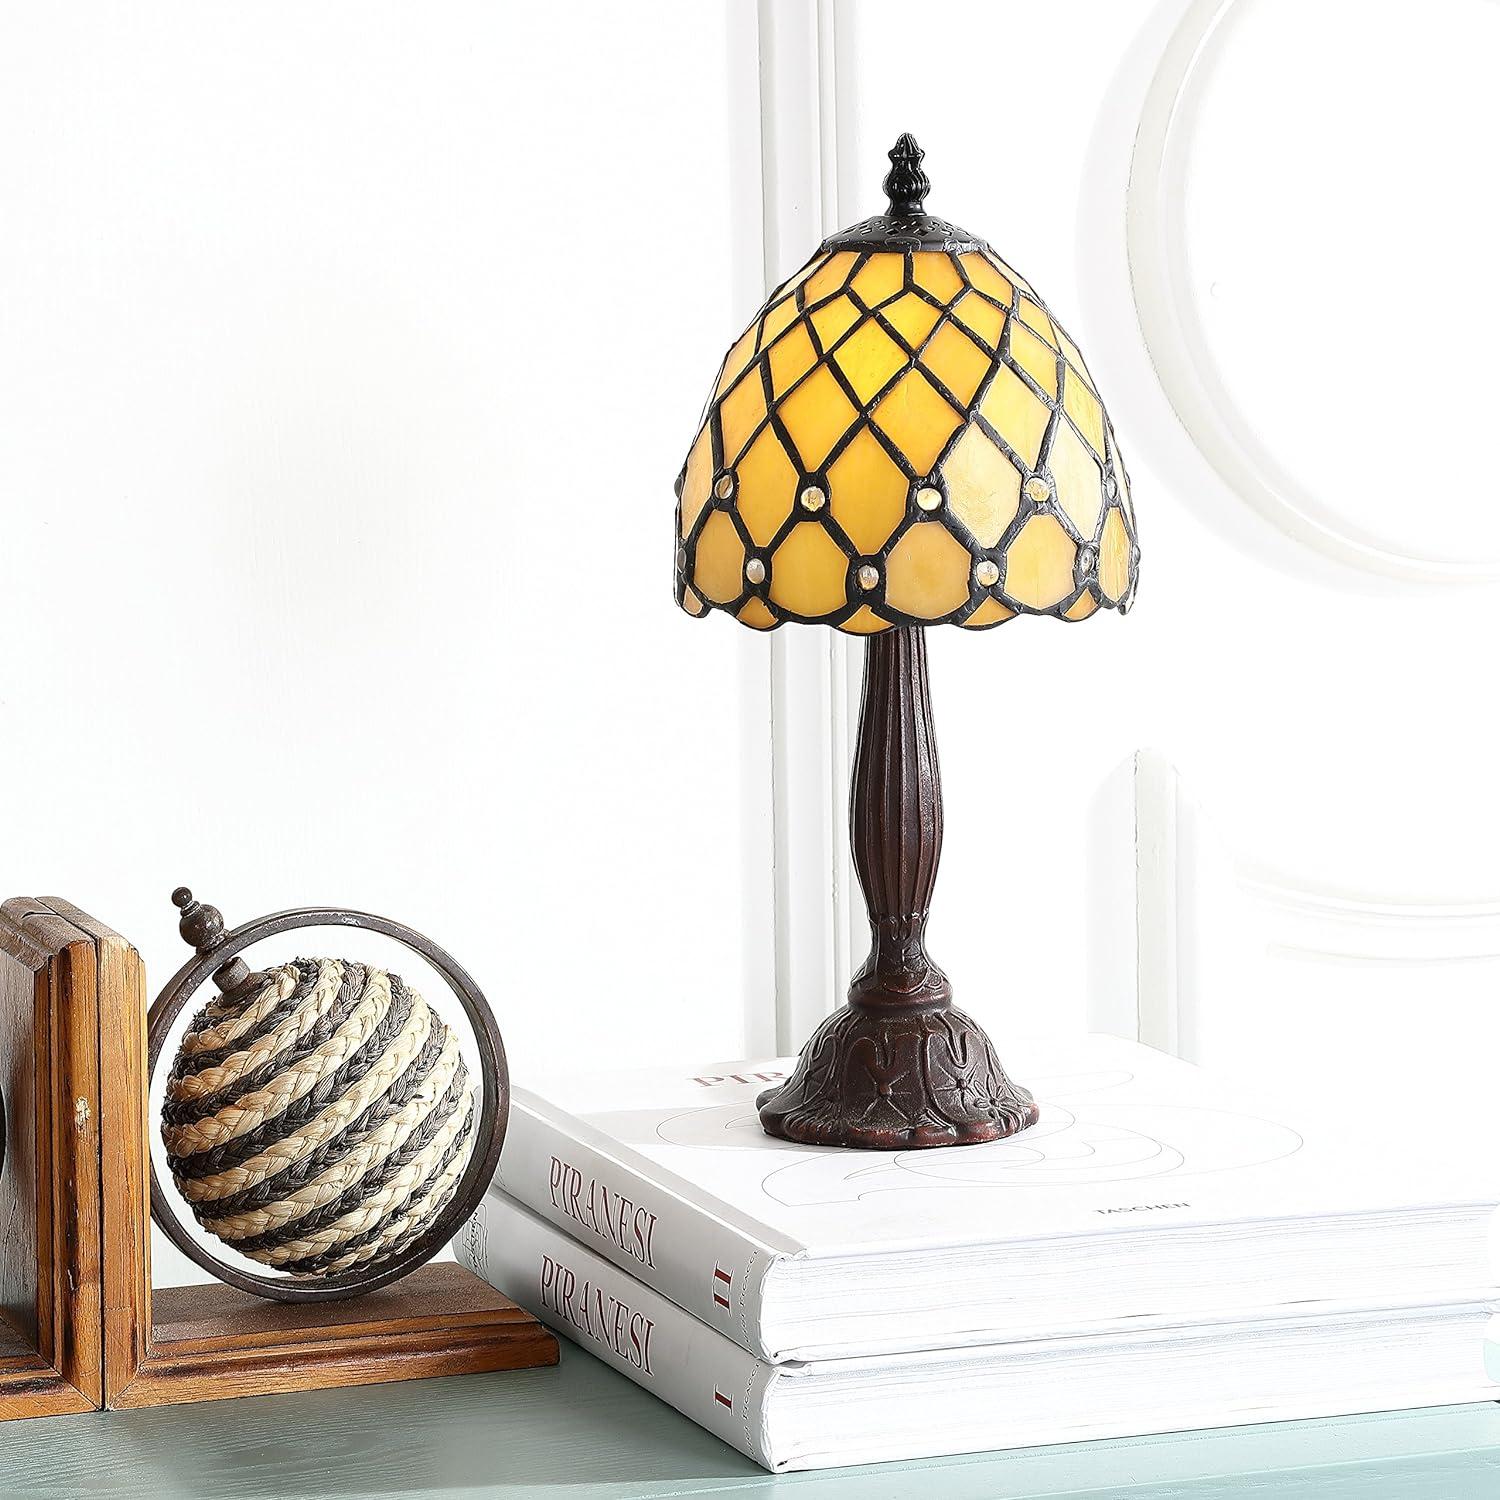 Elegant Tiffany-Style 12.5" Bronze Stained Glass LED Table Lamp